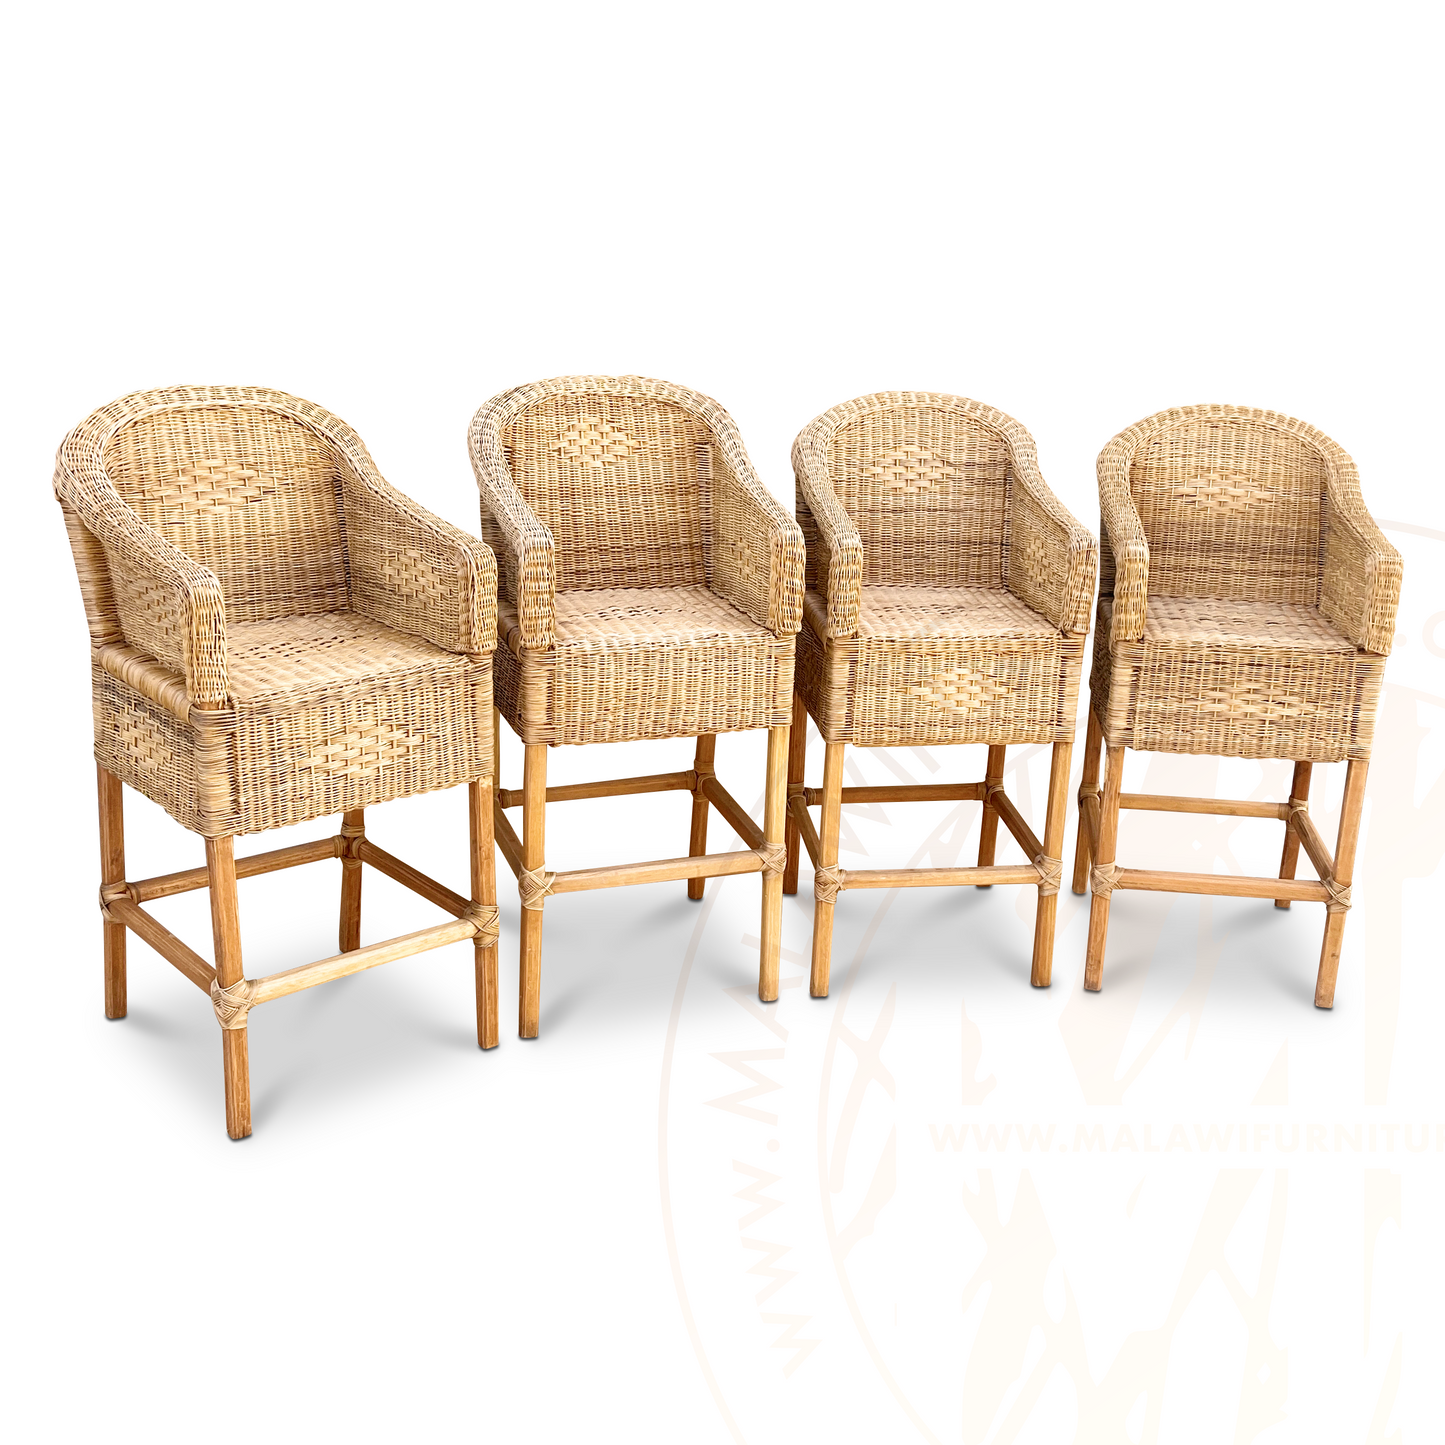 four Classic Bar Stools Chairs with Arms luxury